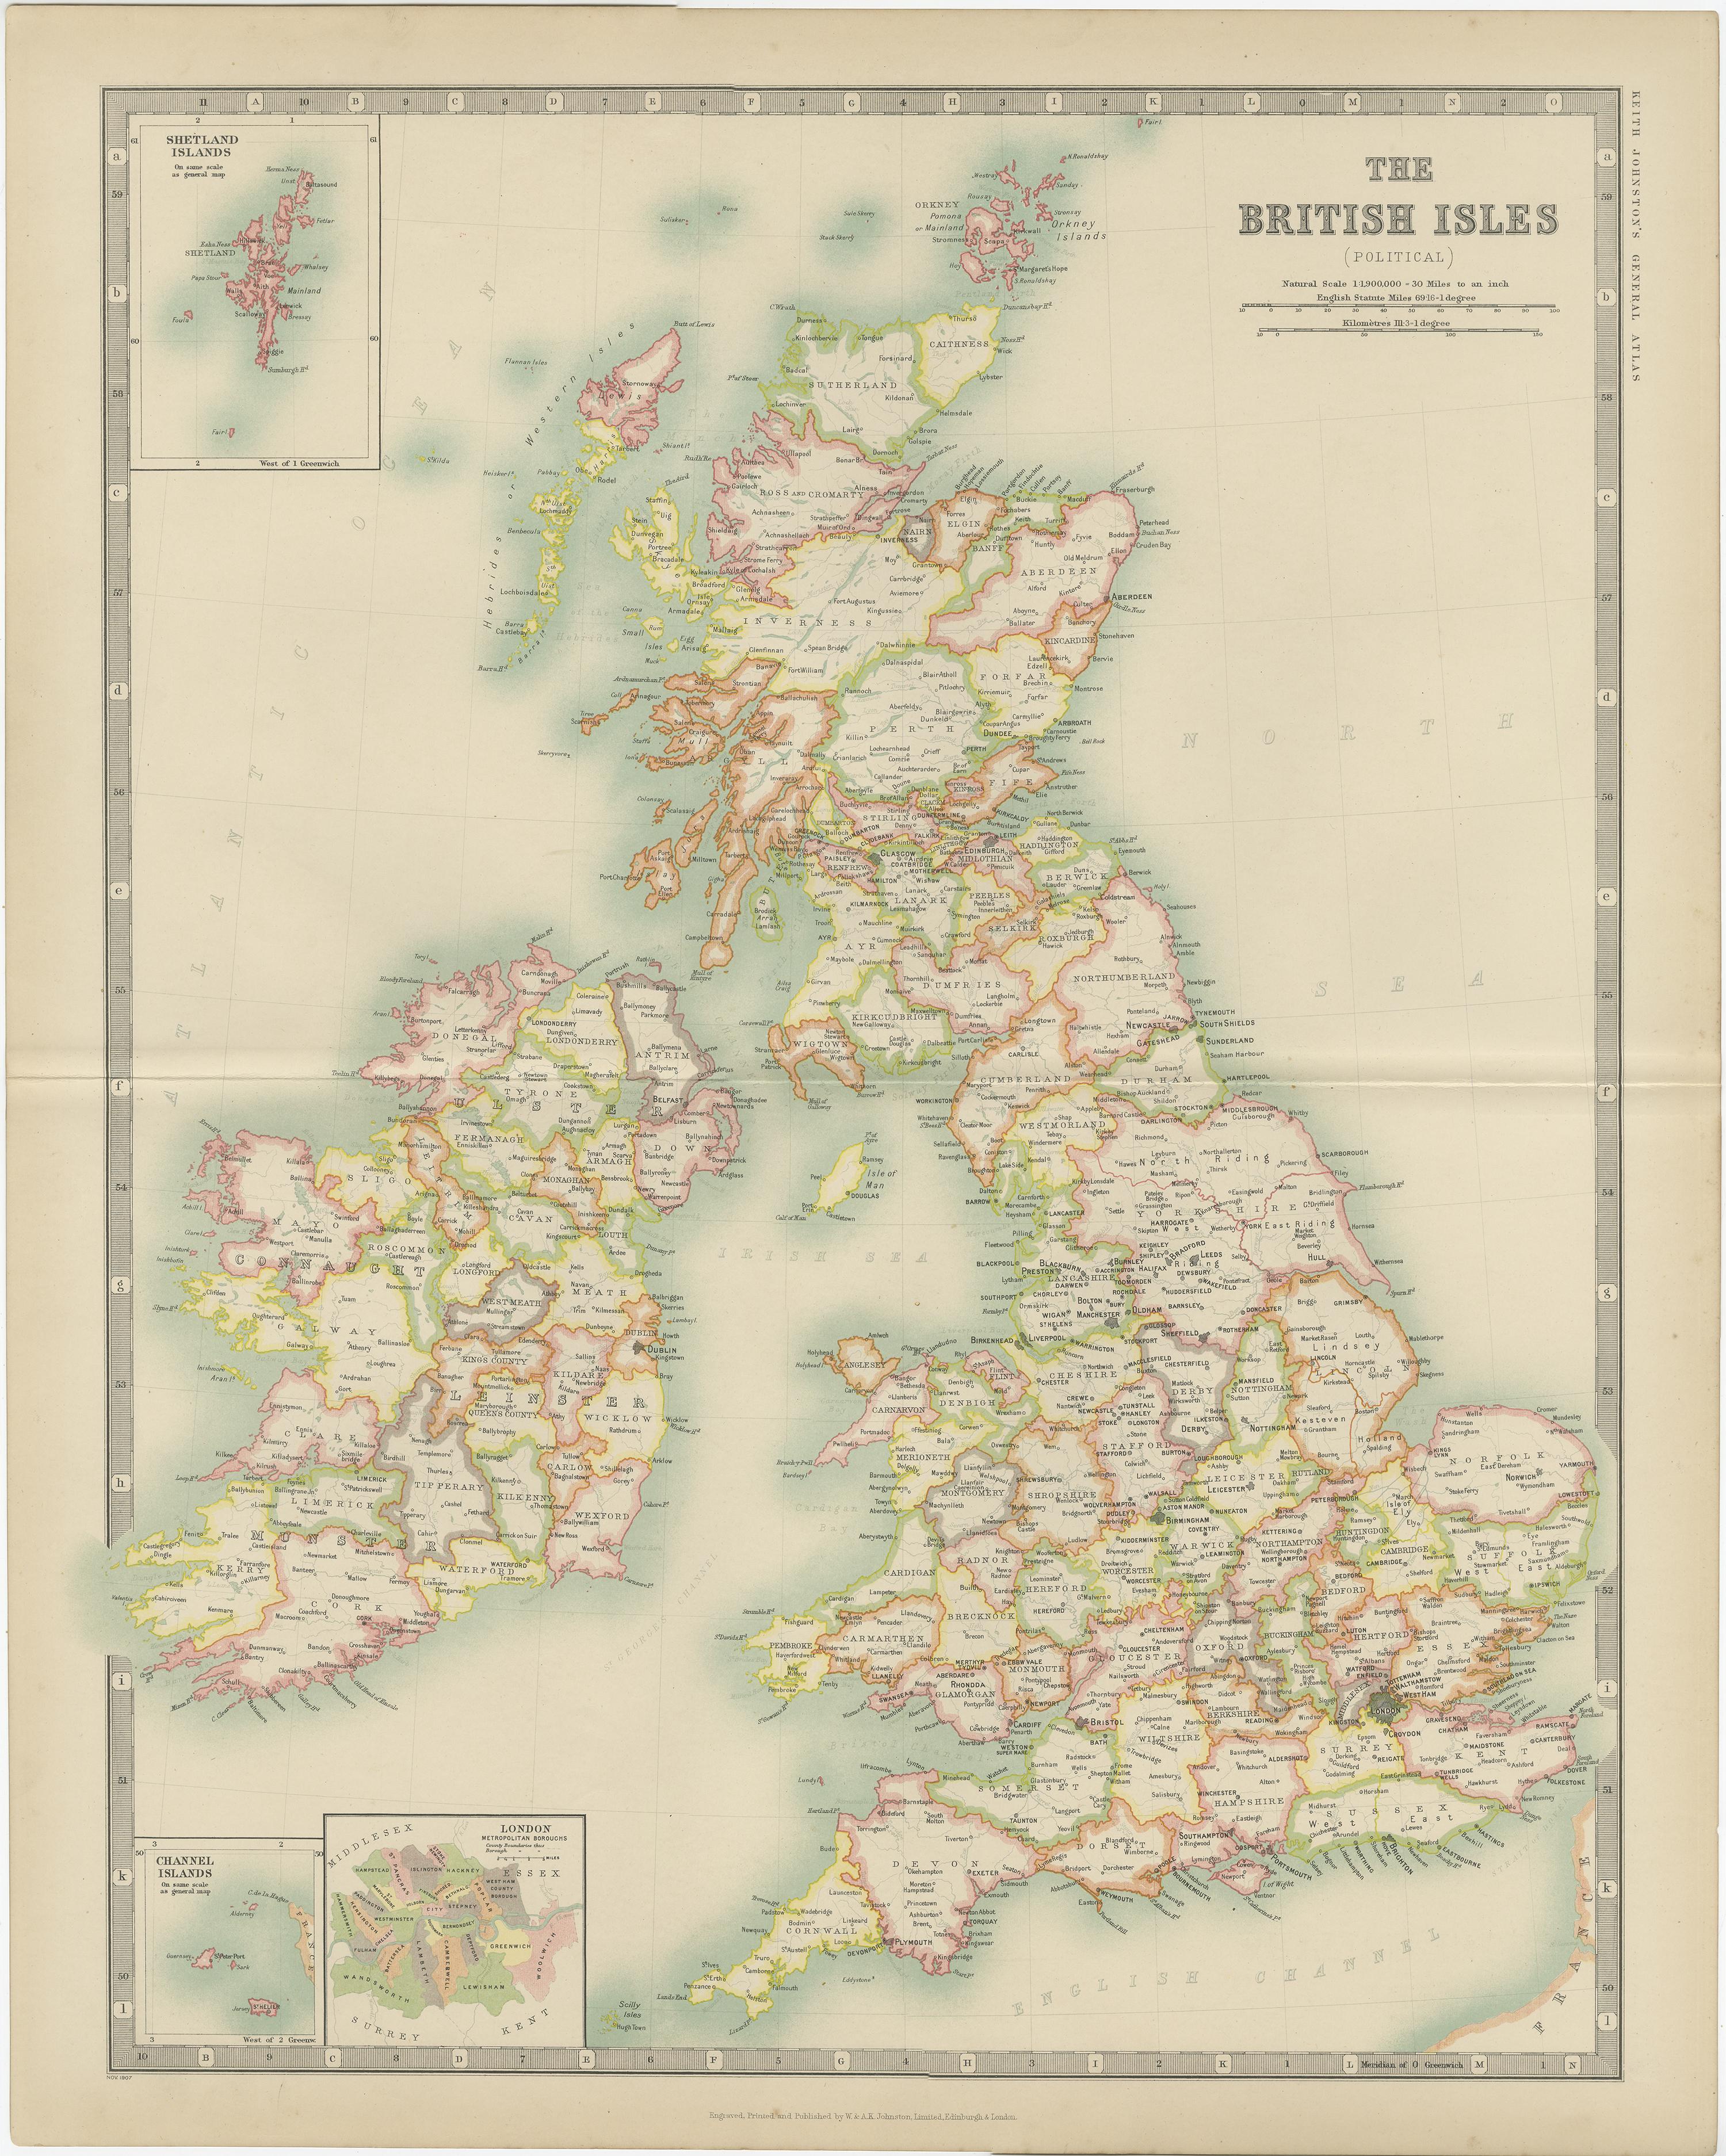 Antique map titled 'The British Isles'. Original antique map of the British Isles. With inset maps of the Shetland Islands, Chanel Islands, and London. This map originates from the ‘Royal Atlas of Modern Geography’. Published by W. & A.K. Johnston,